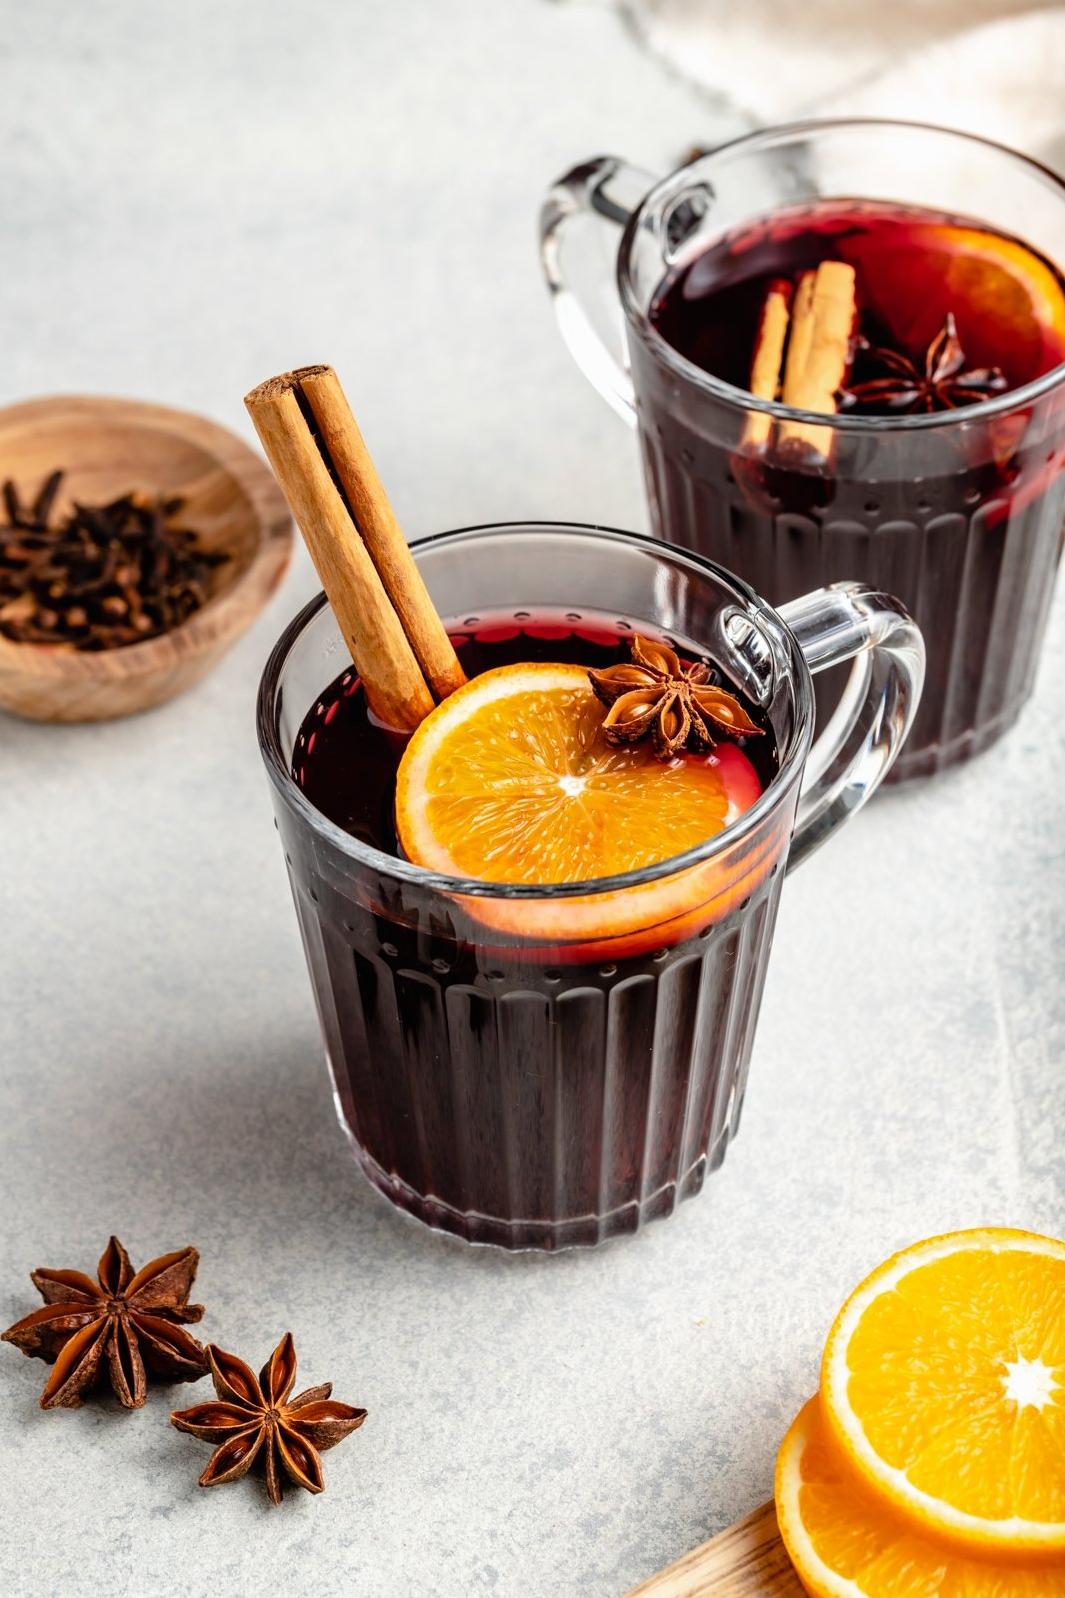  Cloves, cinnamon, and orange peel… These are a few of my favorite things!